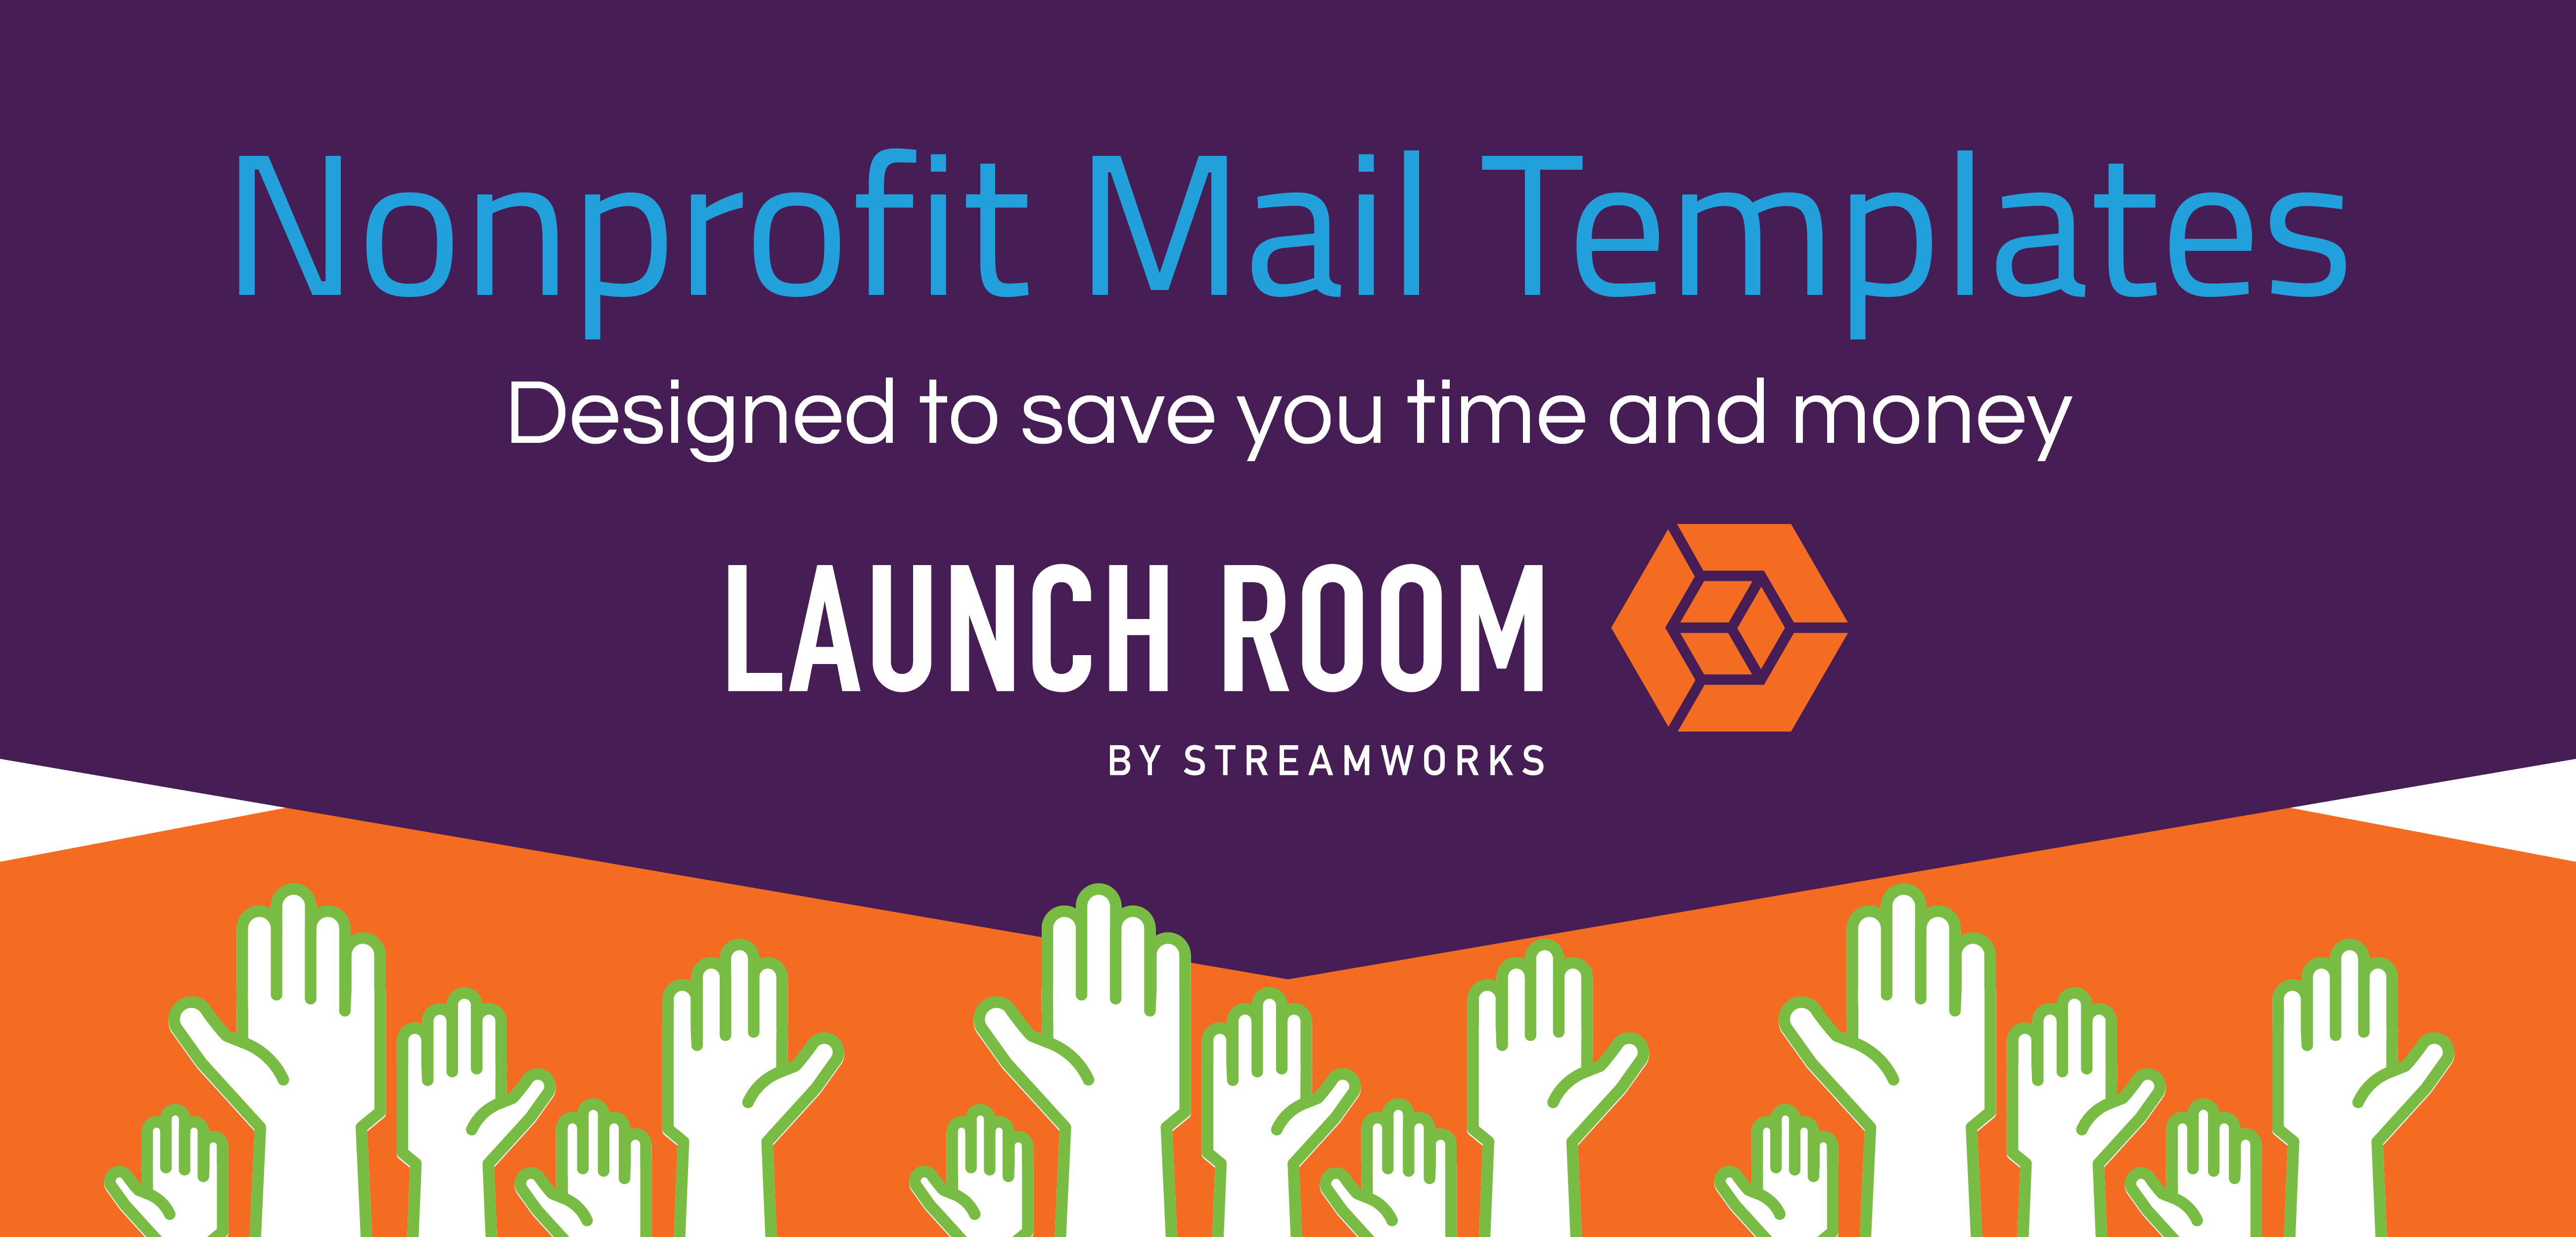 Make a Memorable and Lasting Impact with Launch Room